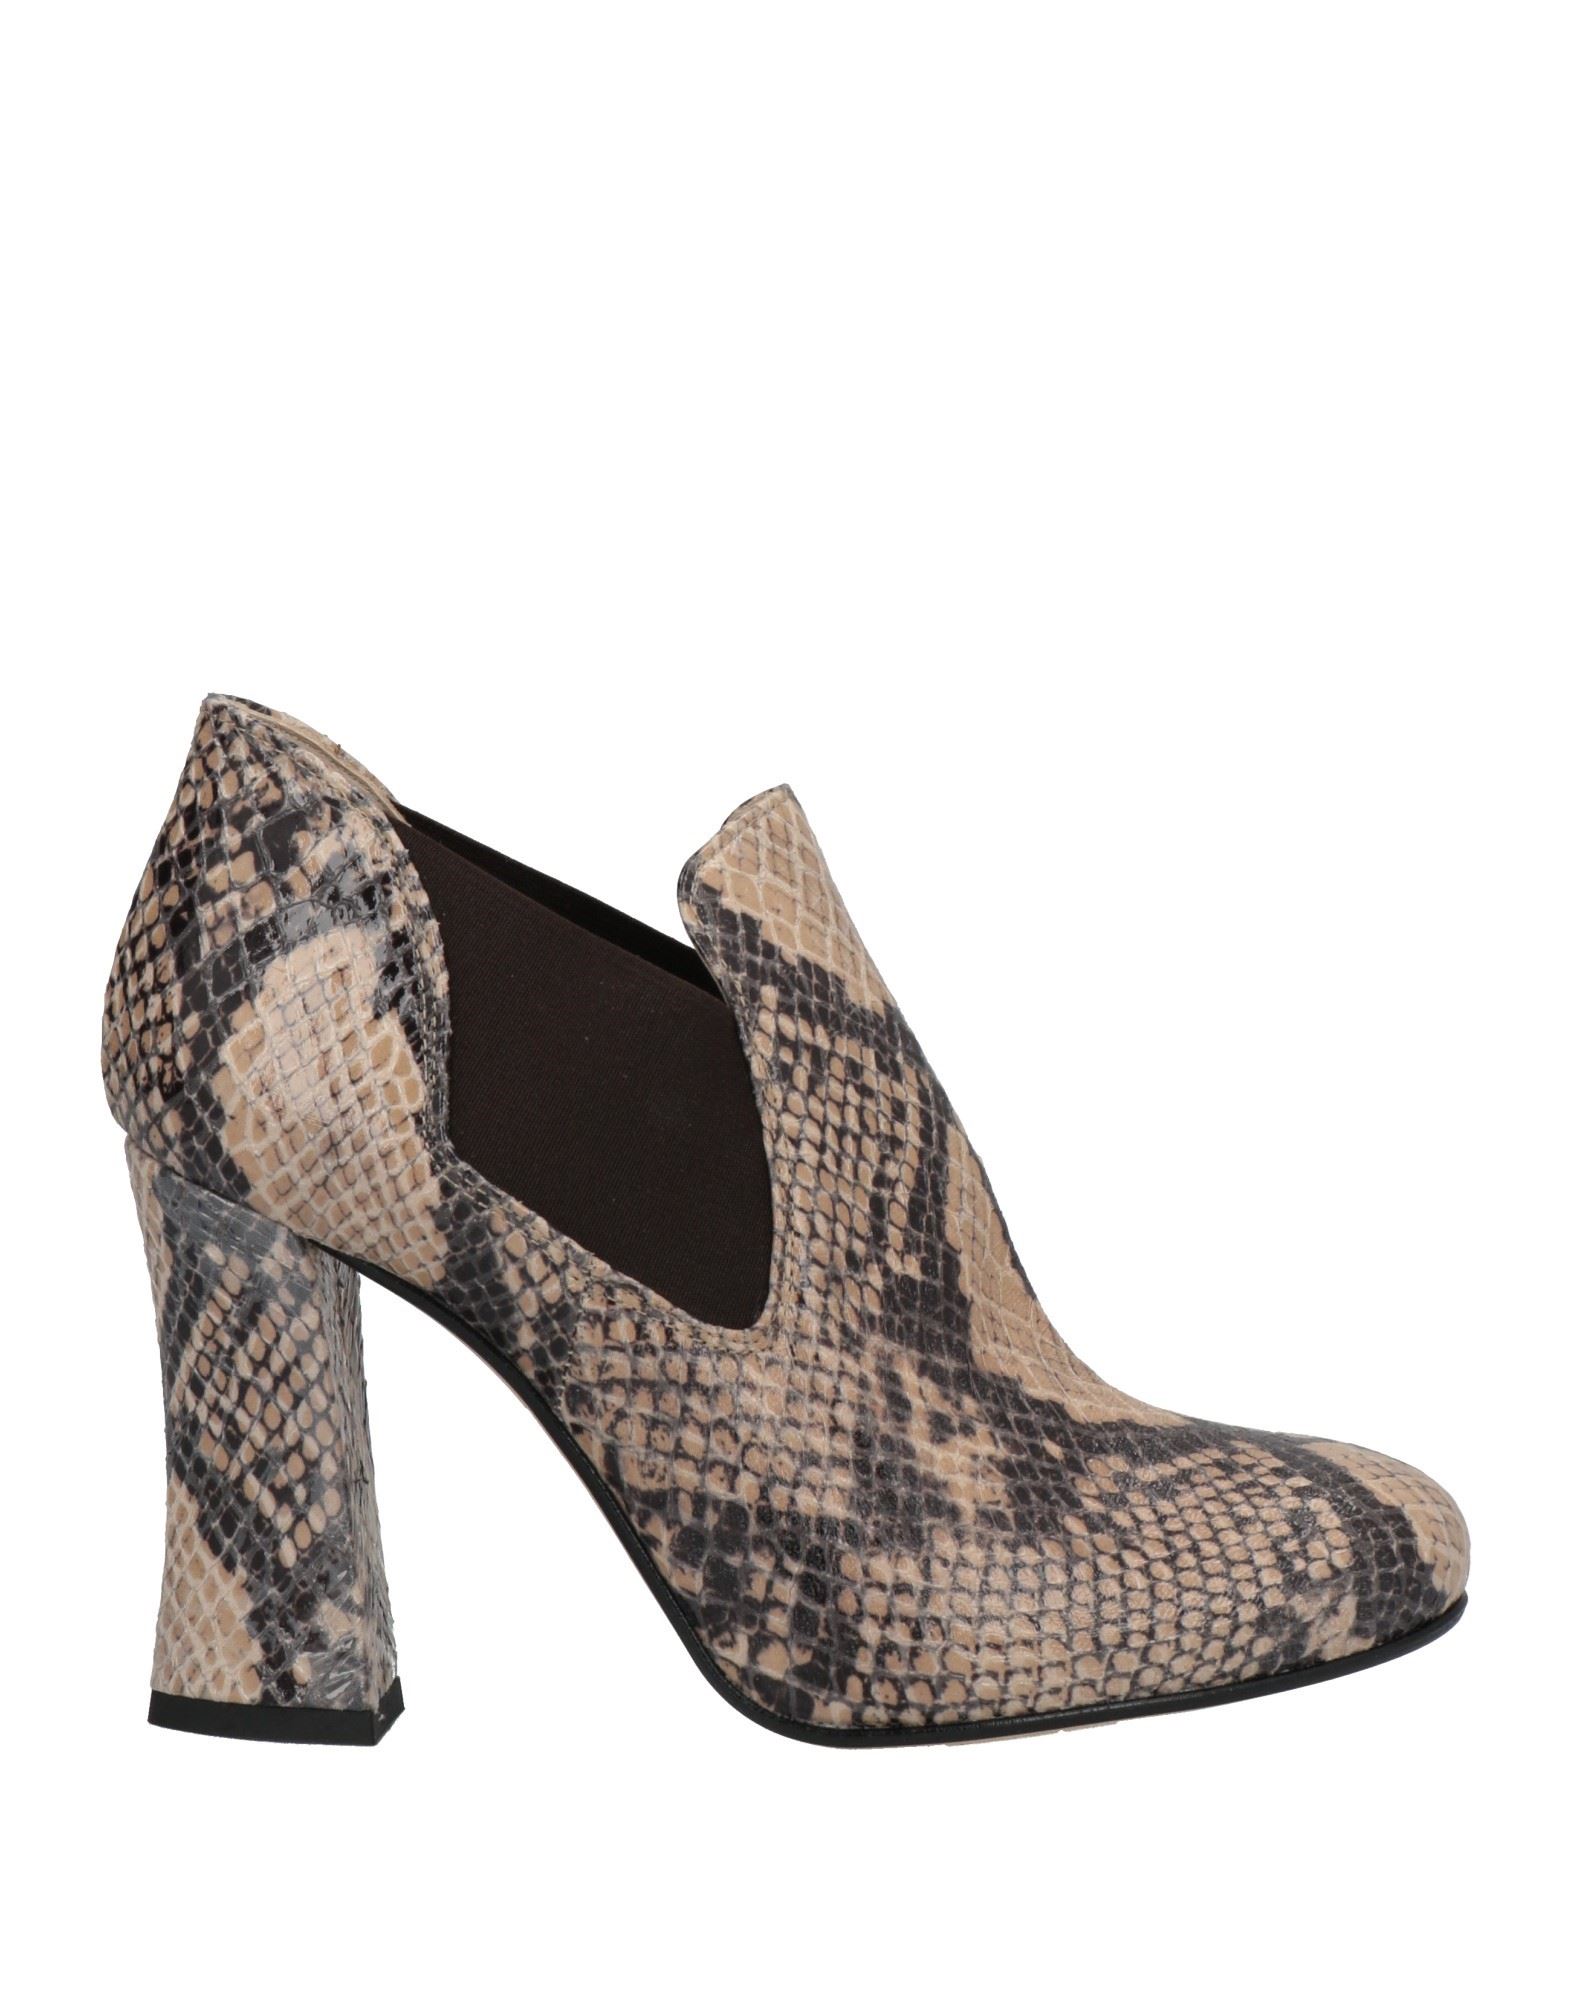 Sgn Giancarlo Paoli Ankle Boots In Beige